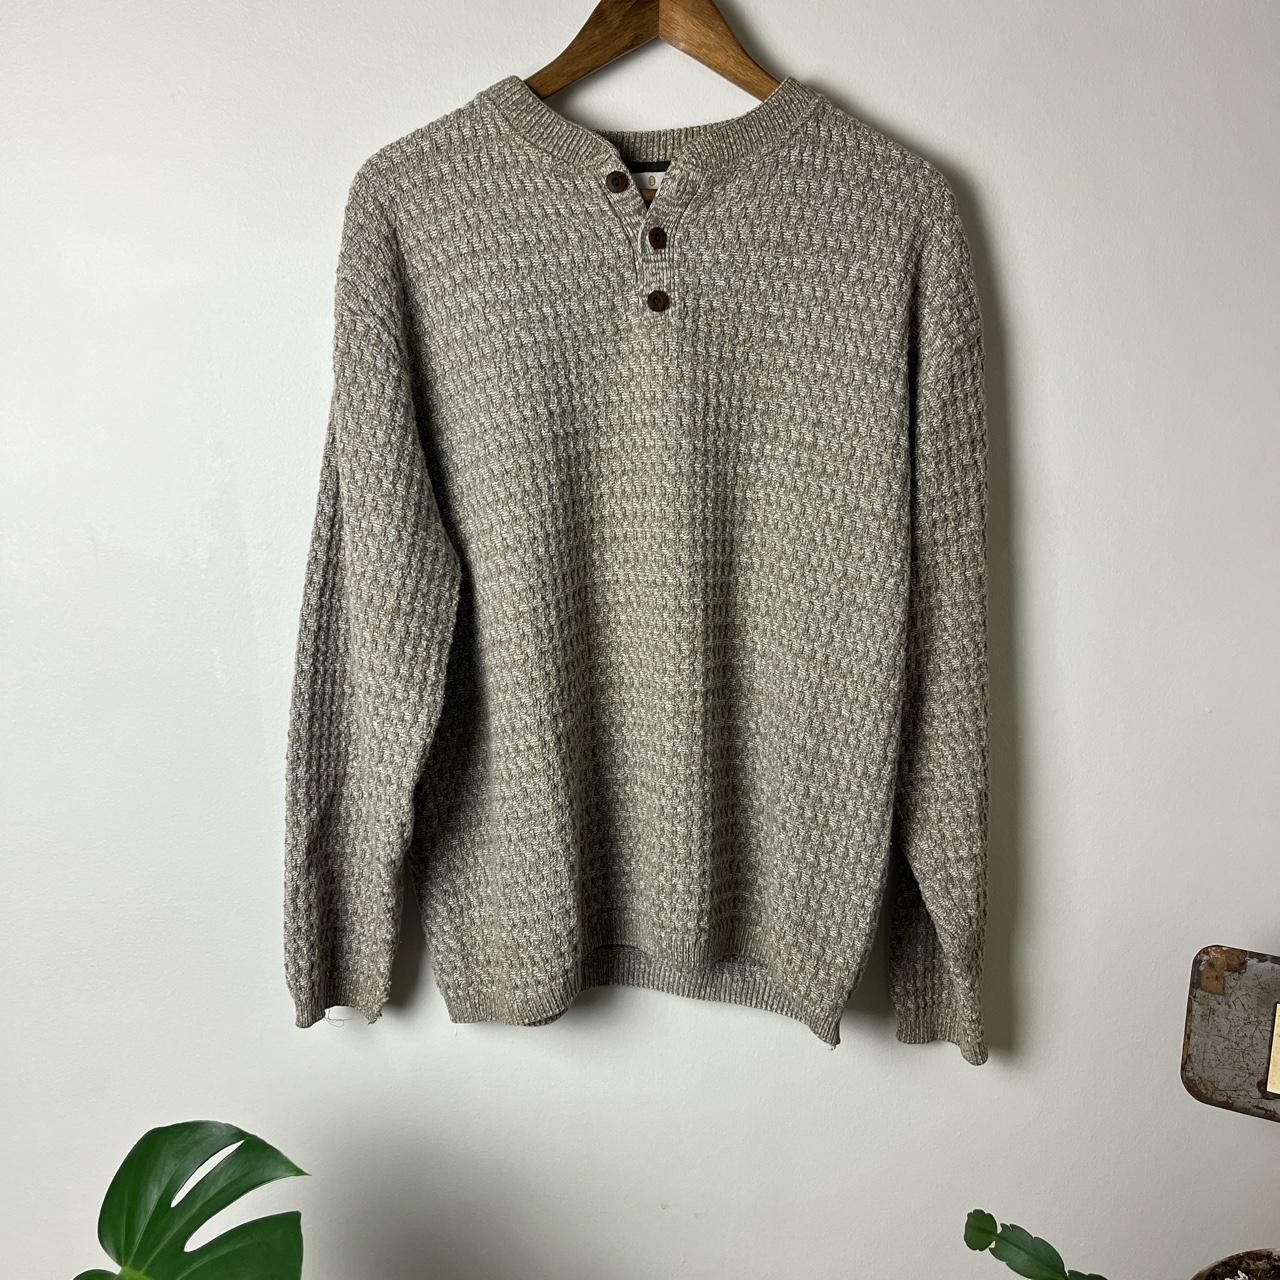 item listed by notcoolclothes